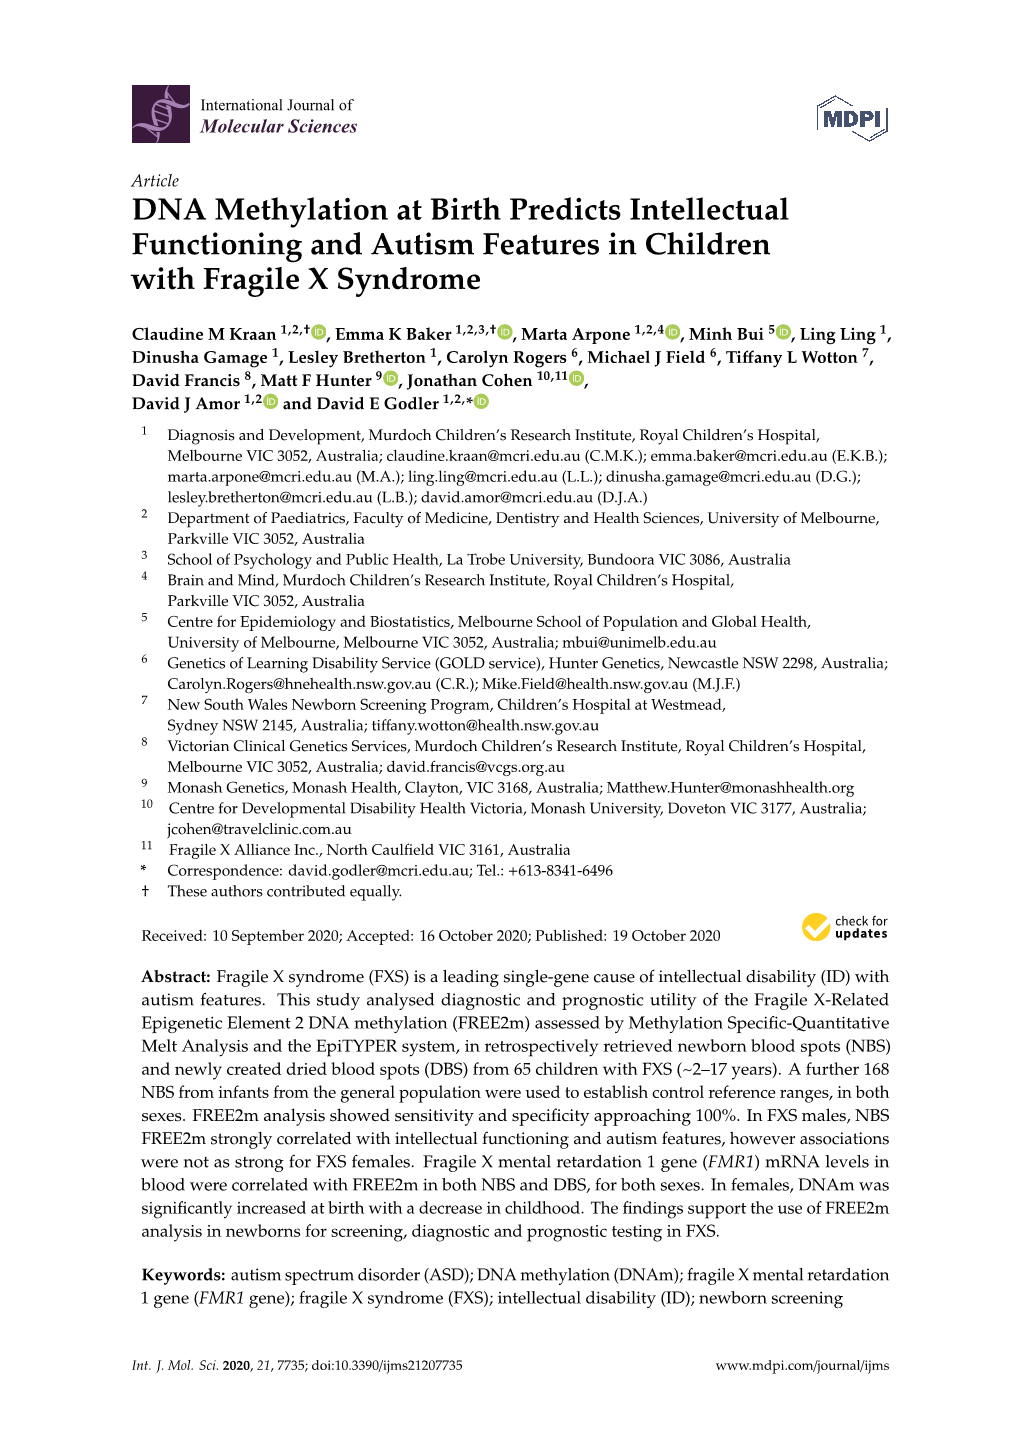 DNA Methylation at Birth Predicts Intellectual Functioning and Autism Features in Children with Fragile X Syndrome